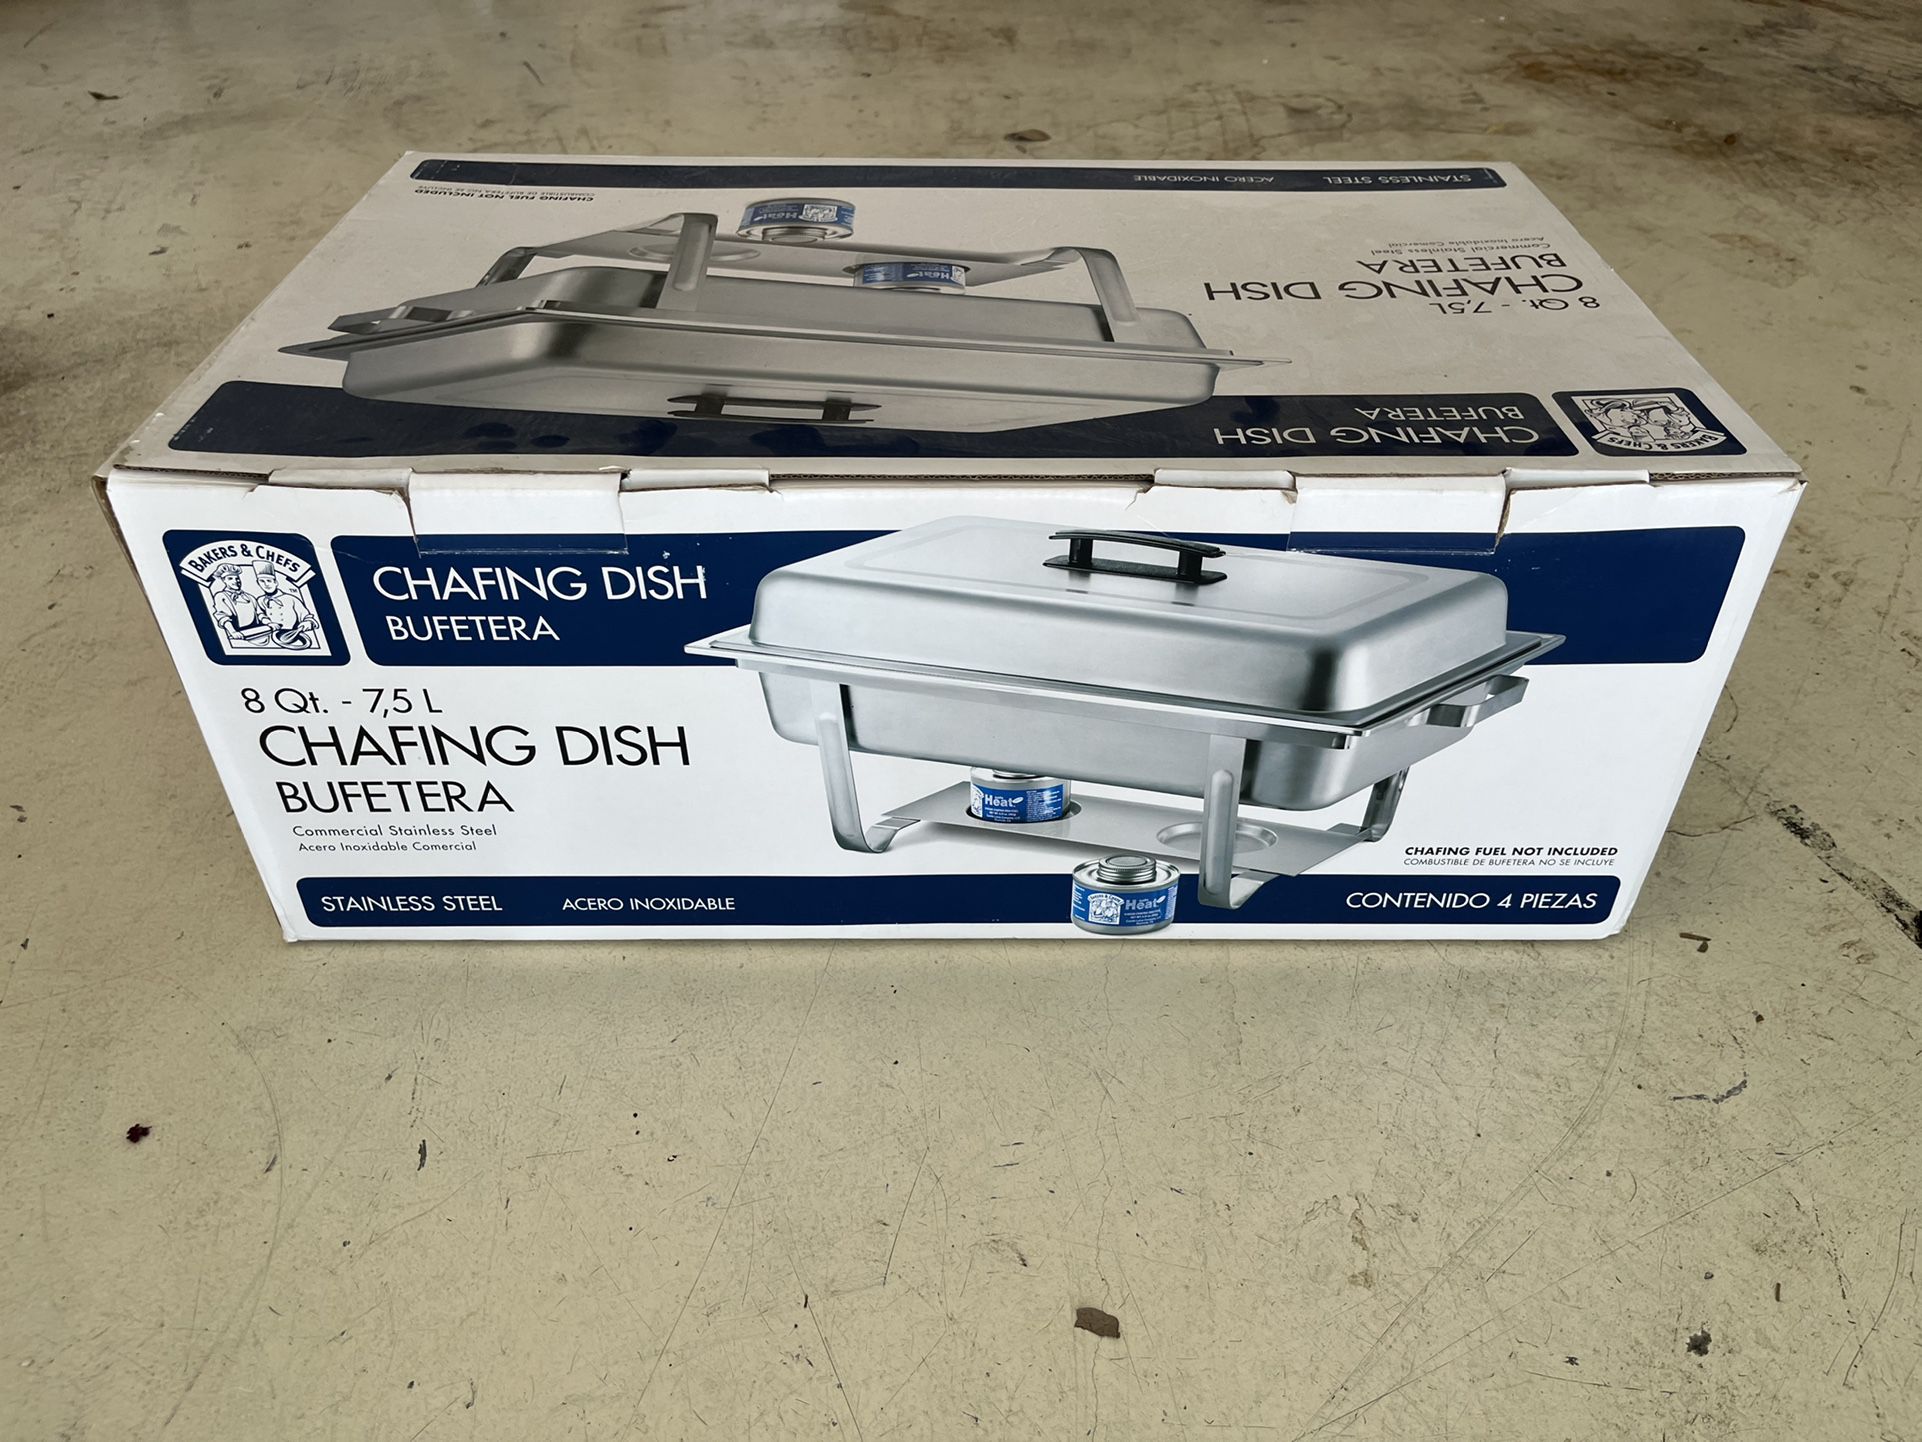 3 Chafing Dishes - slightly used